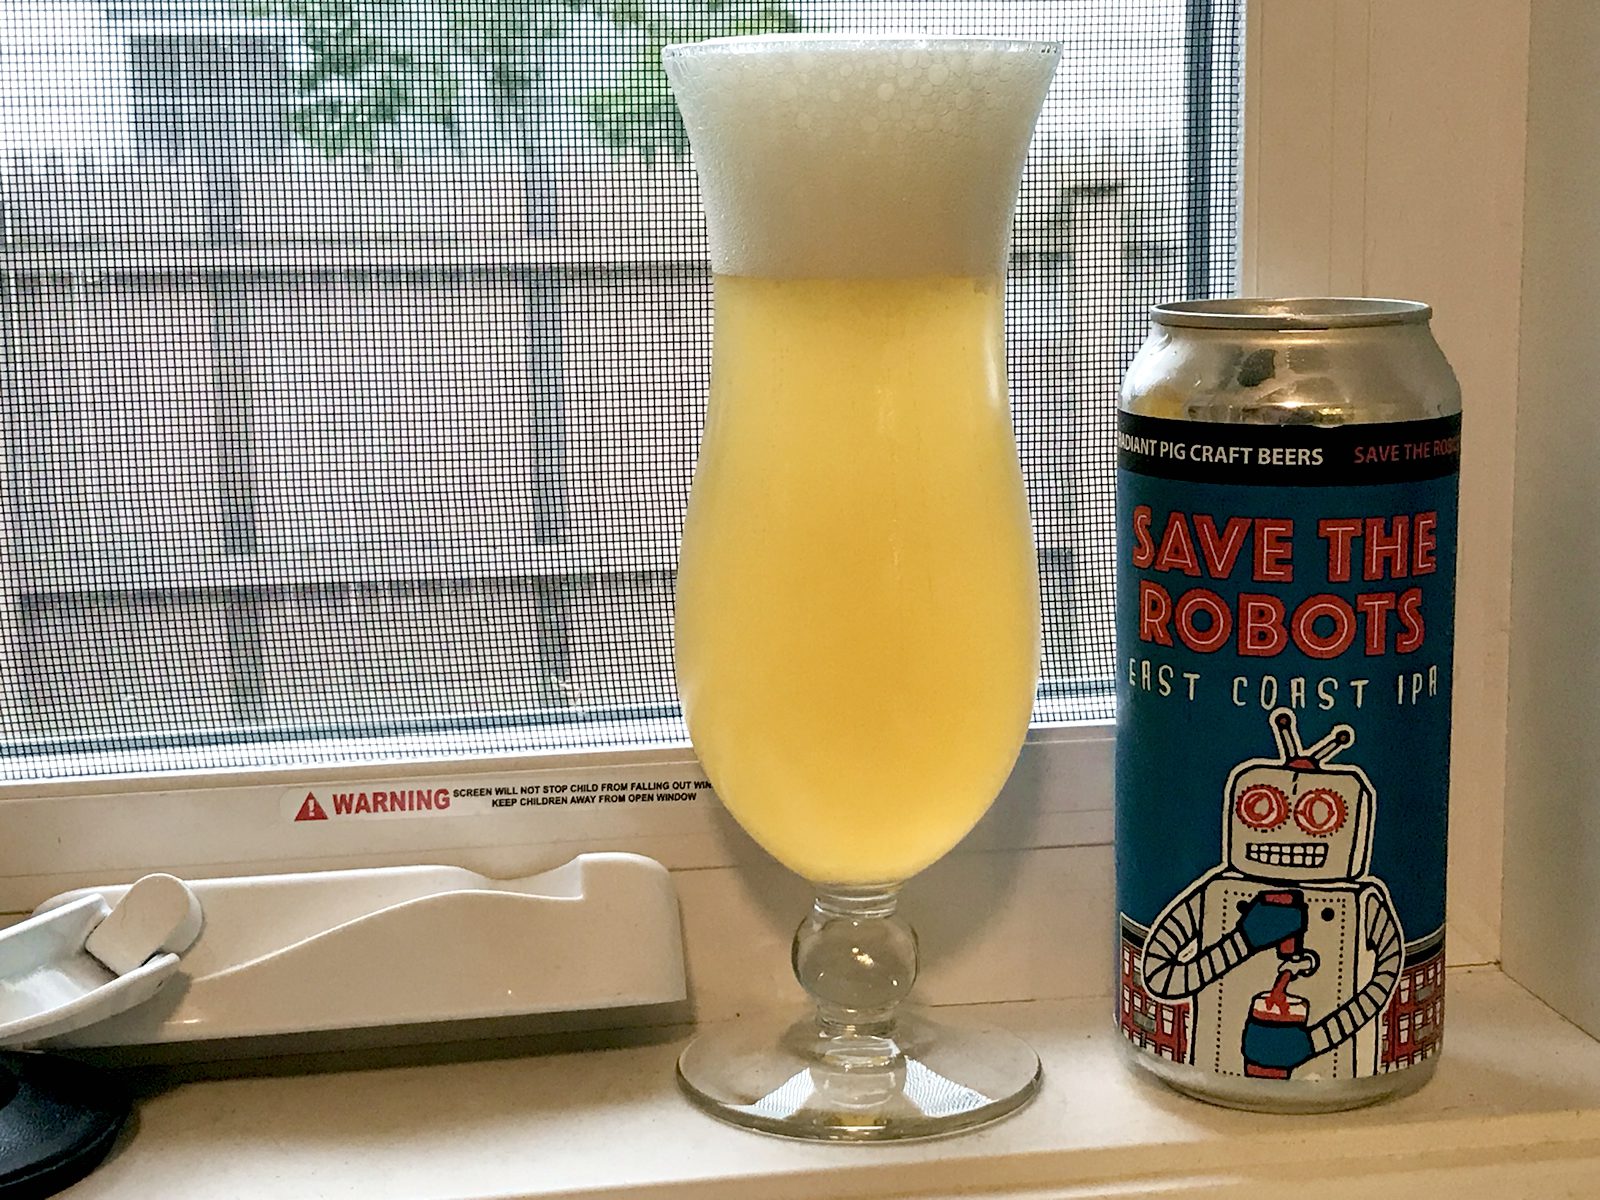 Radiant Pig Craft Beers: Save the Robots